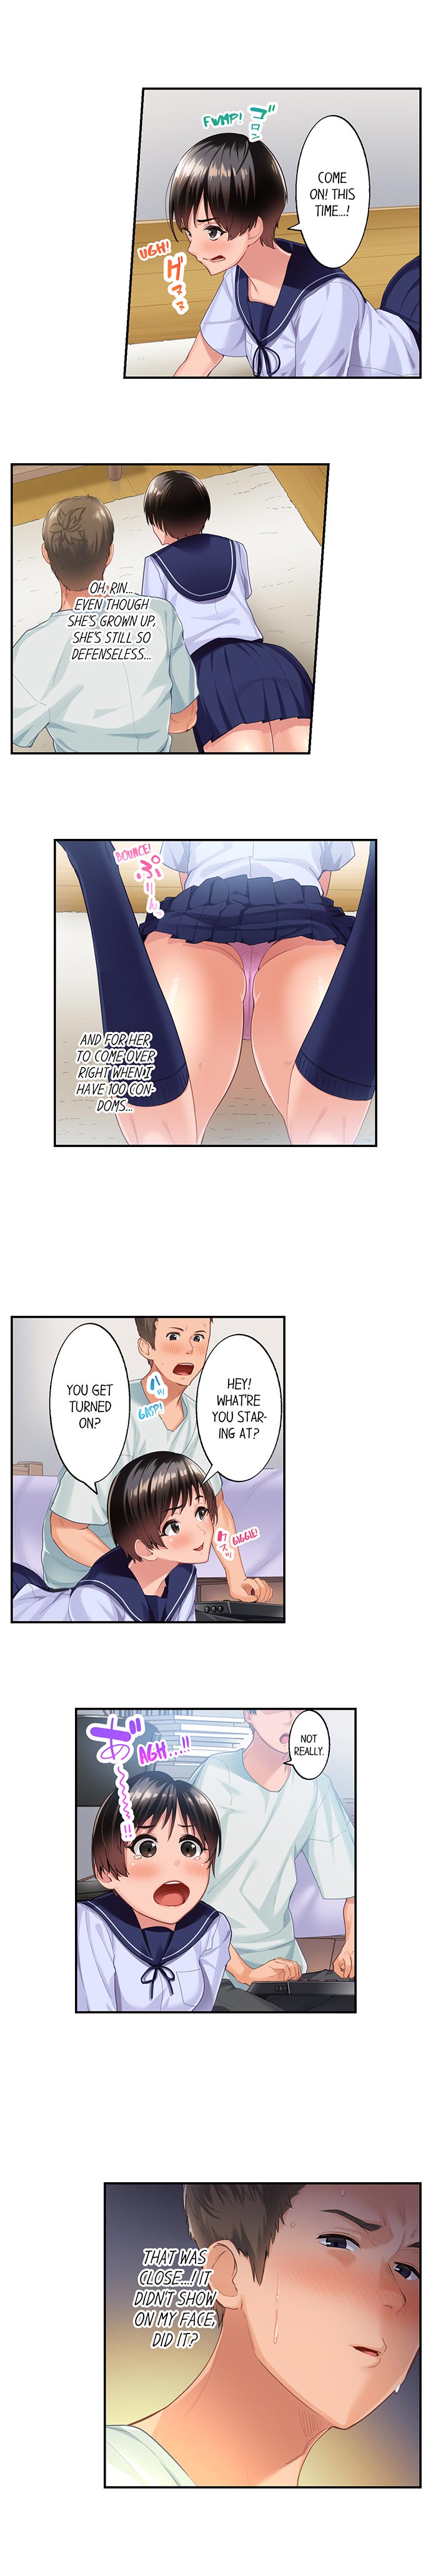 Using 100 Boxes of Condoms With My Childhood Friend! - Chapter 1 Page 4